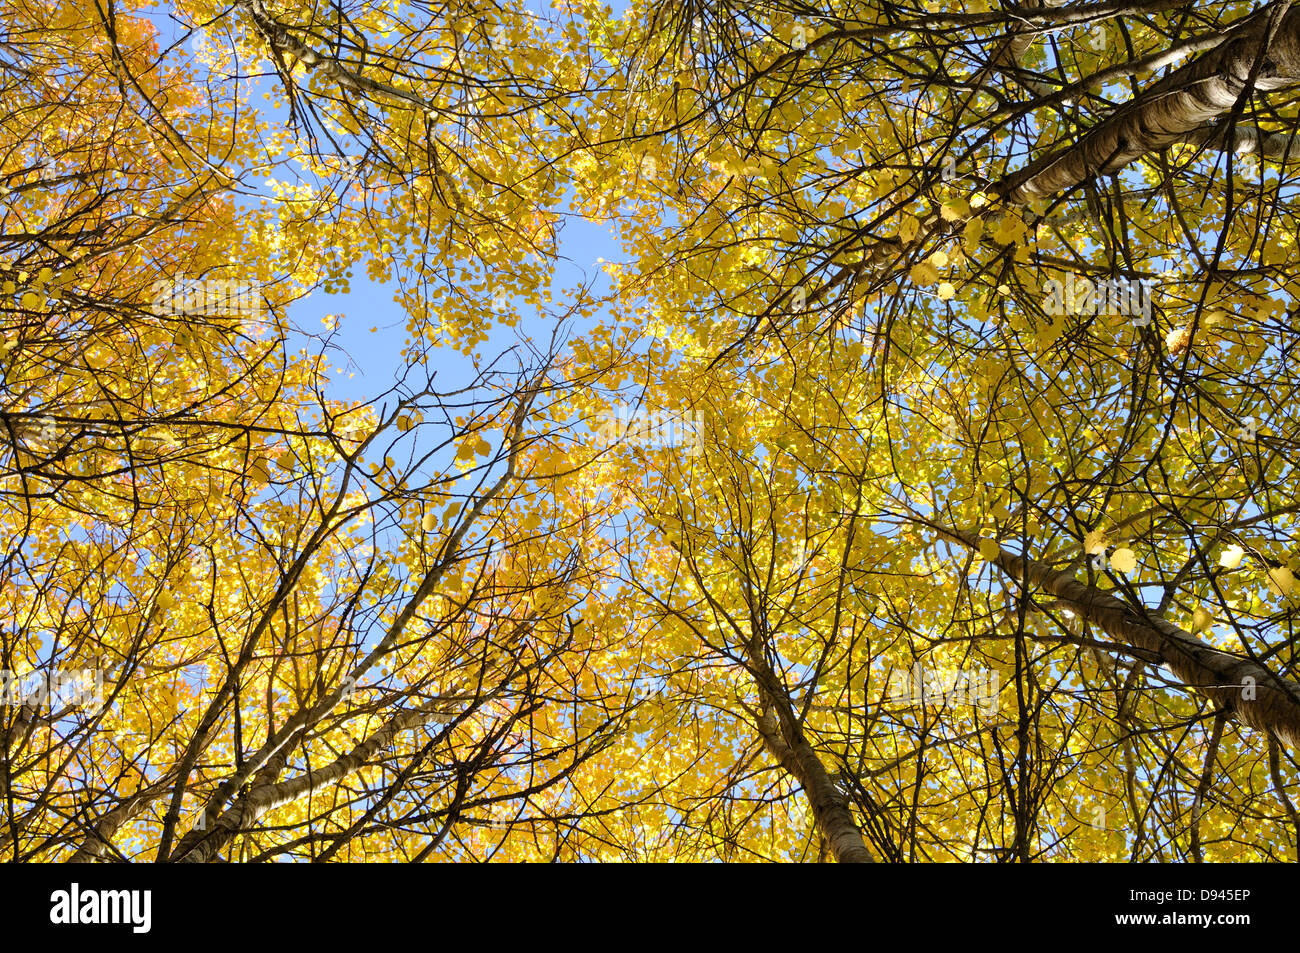 Yellow leaves on trees Stock Photo